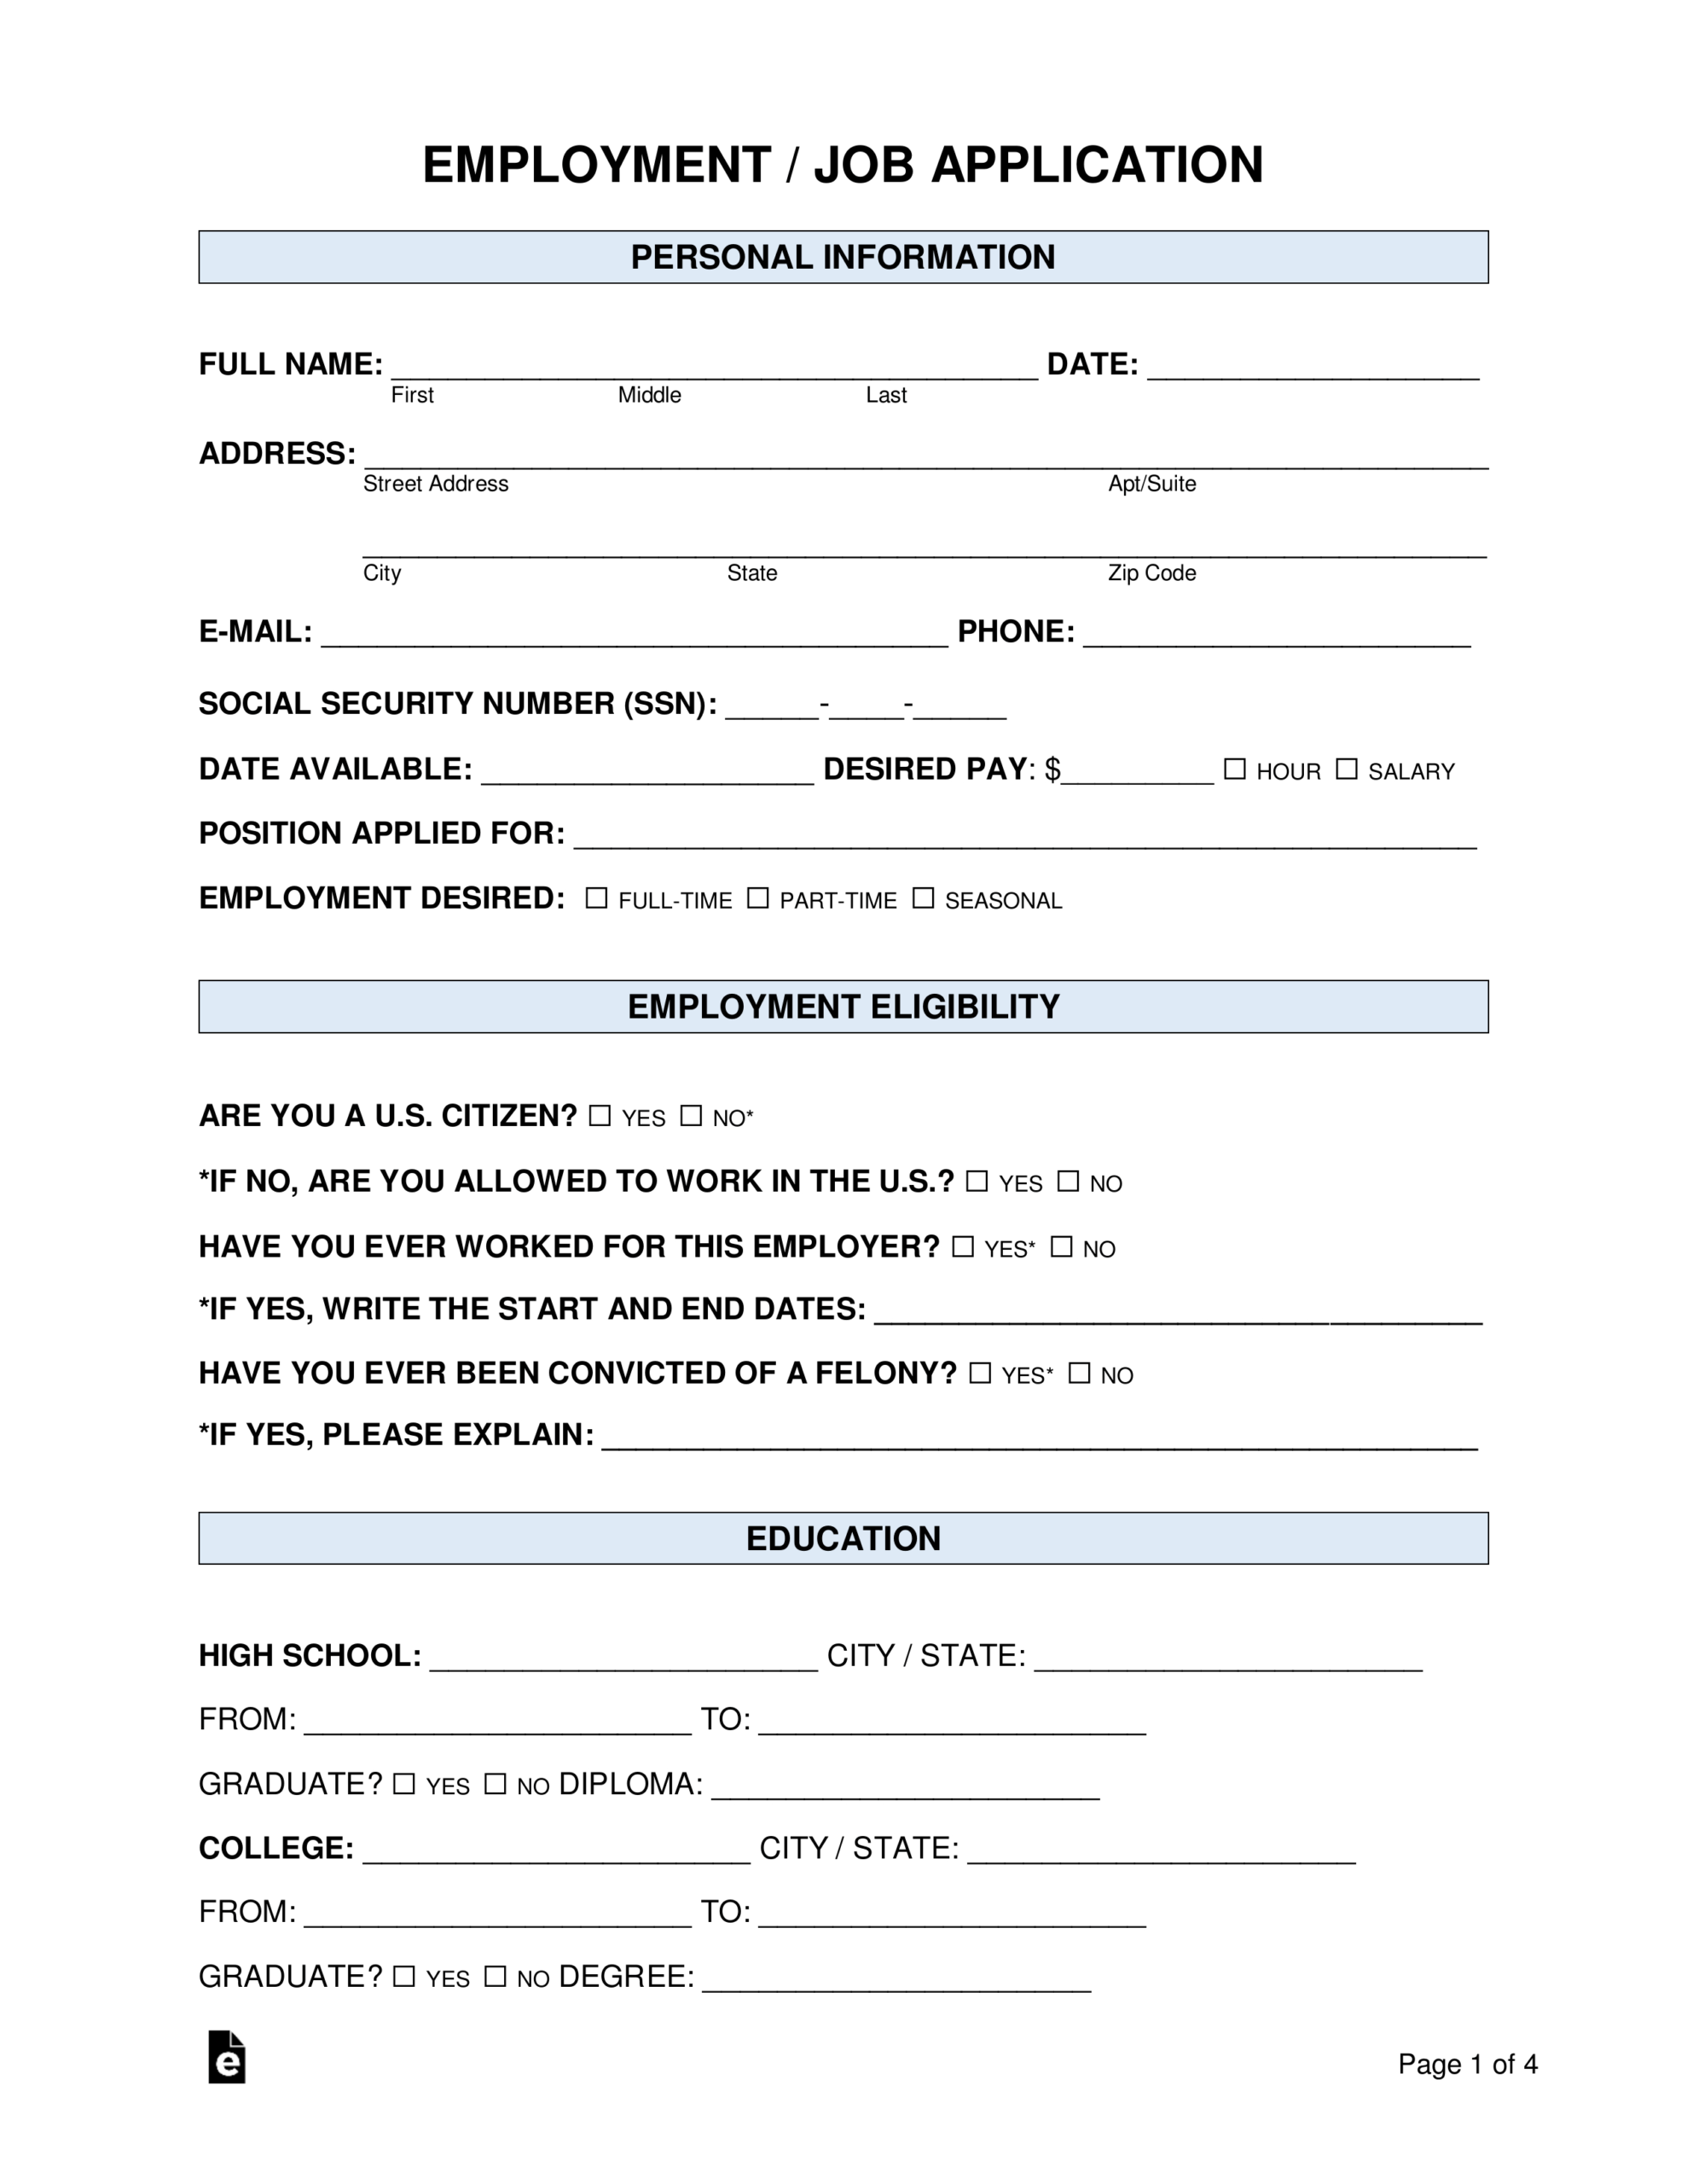 Free Job Application Form - Standard Template - Word | Pdf For Employment Application Template Microsoft Word